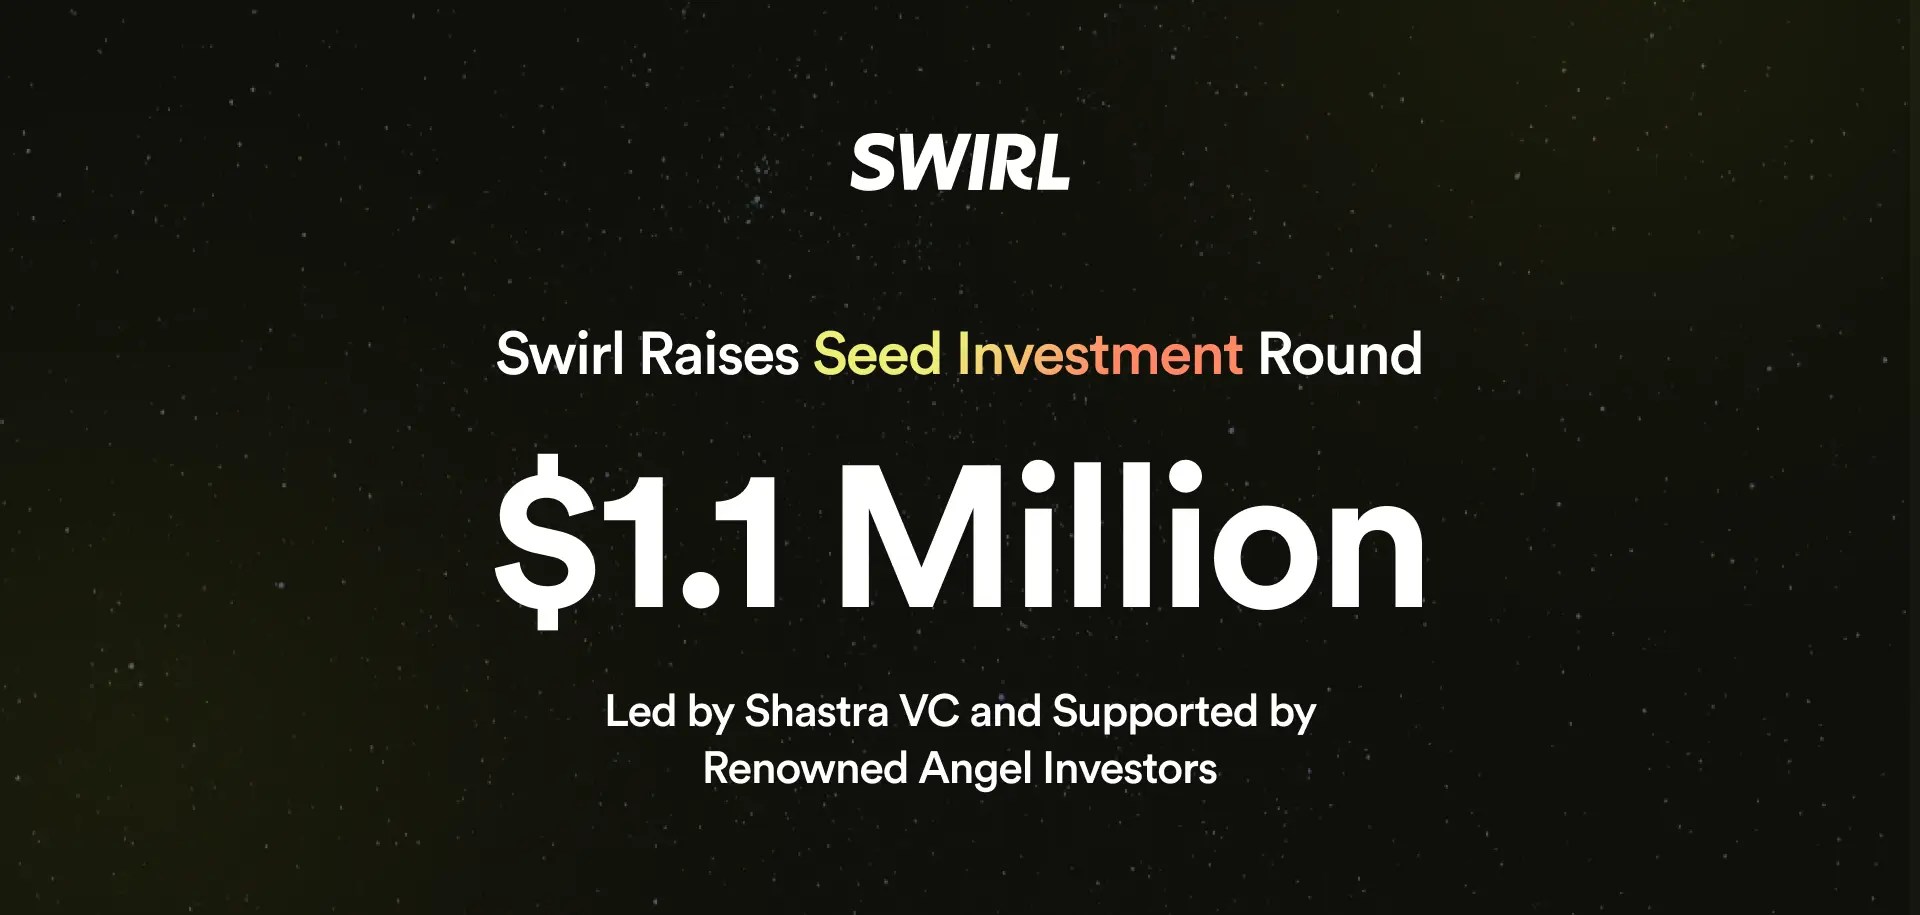 Swirl Secures $1.1 Million Seed Funding Boost